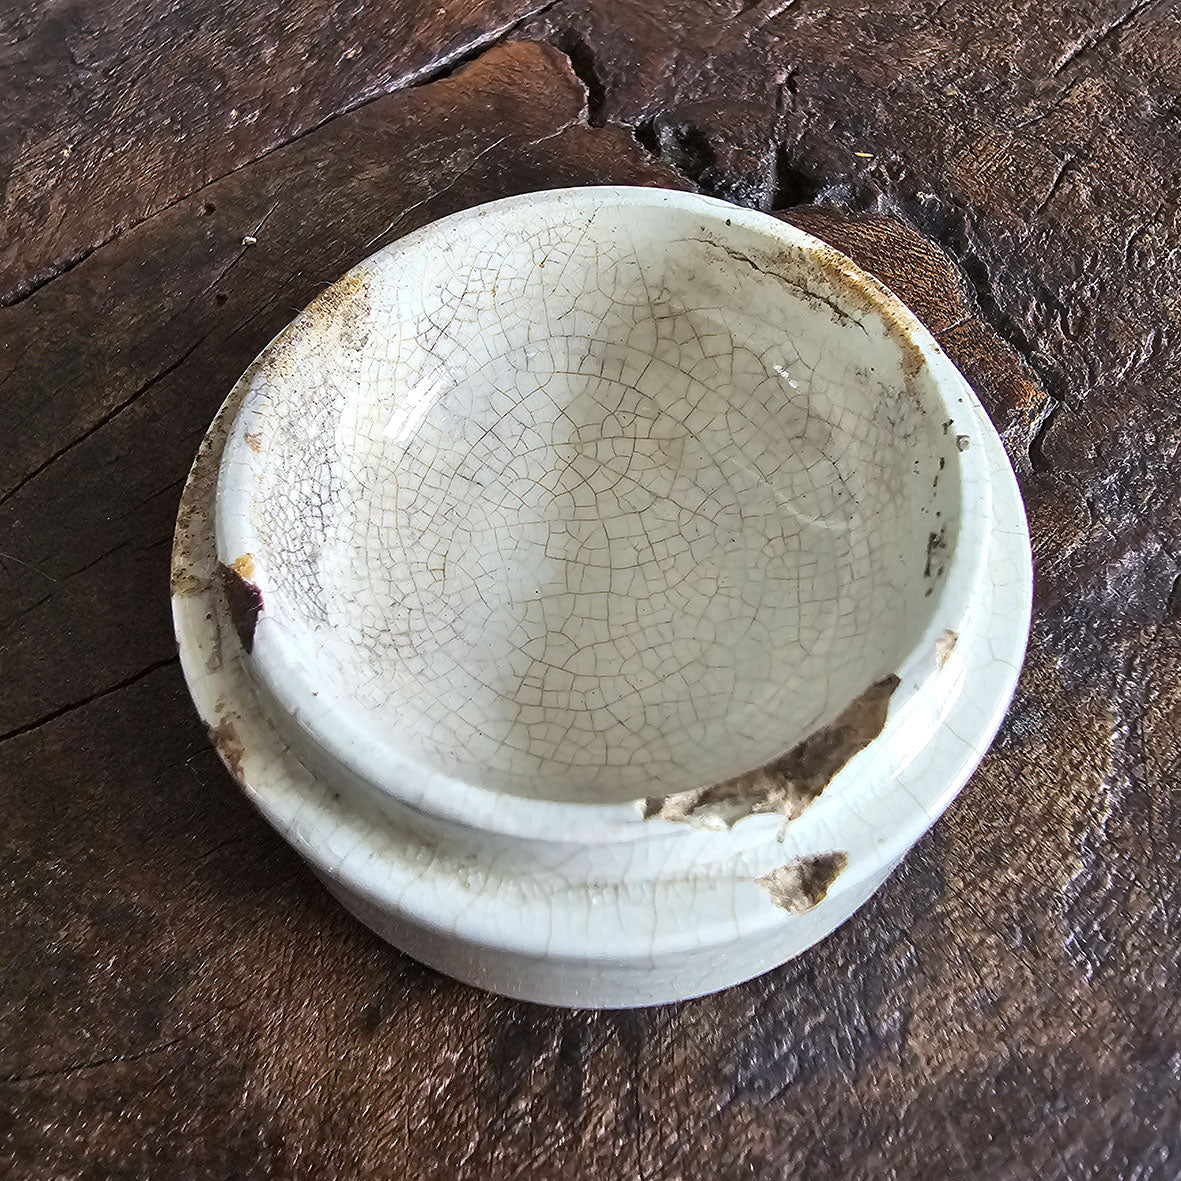 An Edwardian A Boots Cold Cream Pot. Lovely crazing to the glazes surface. Marked 'TOO GOOD - PATENT - LONDON'. - SHOP NOW -Intovintage.co.uk